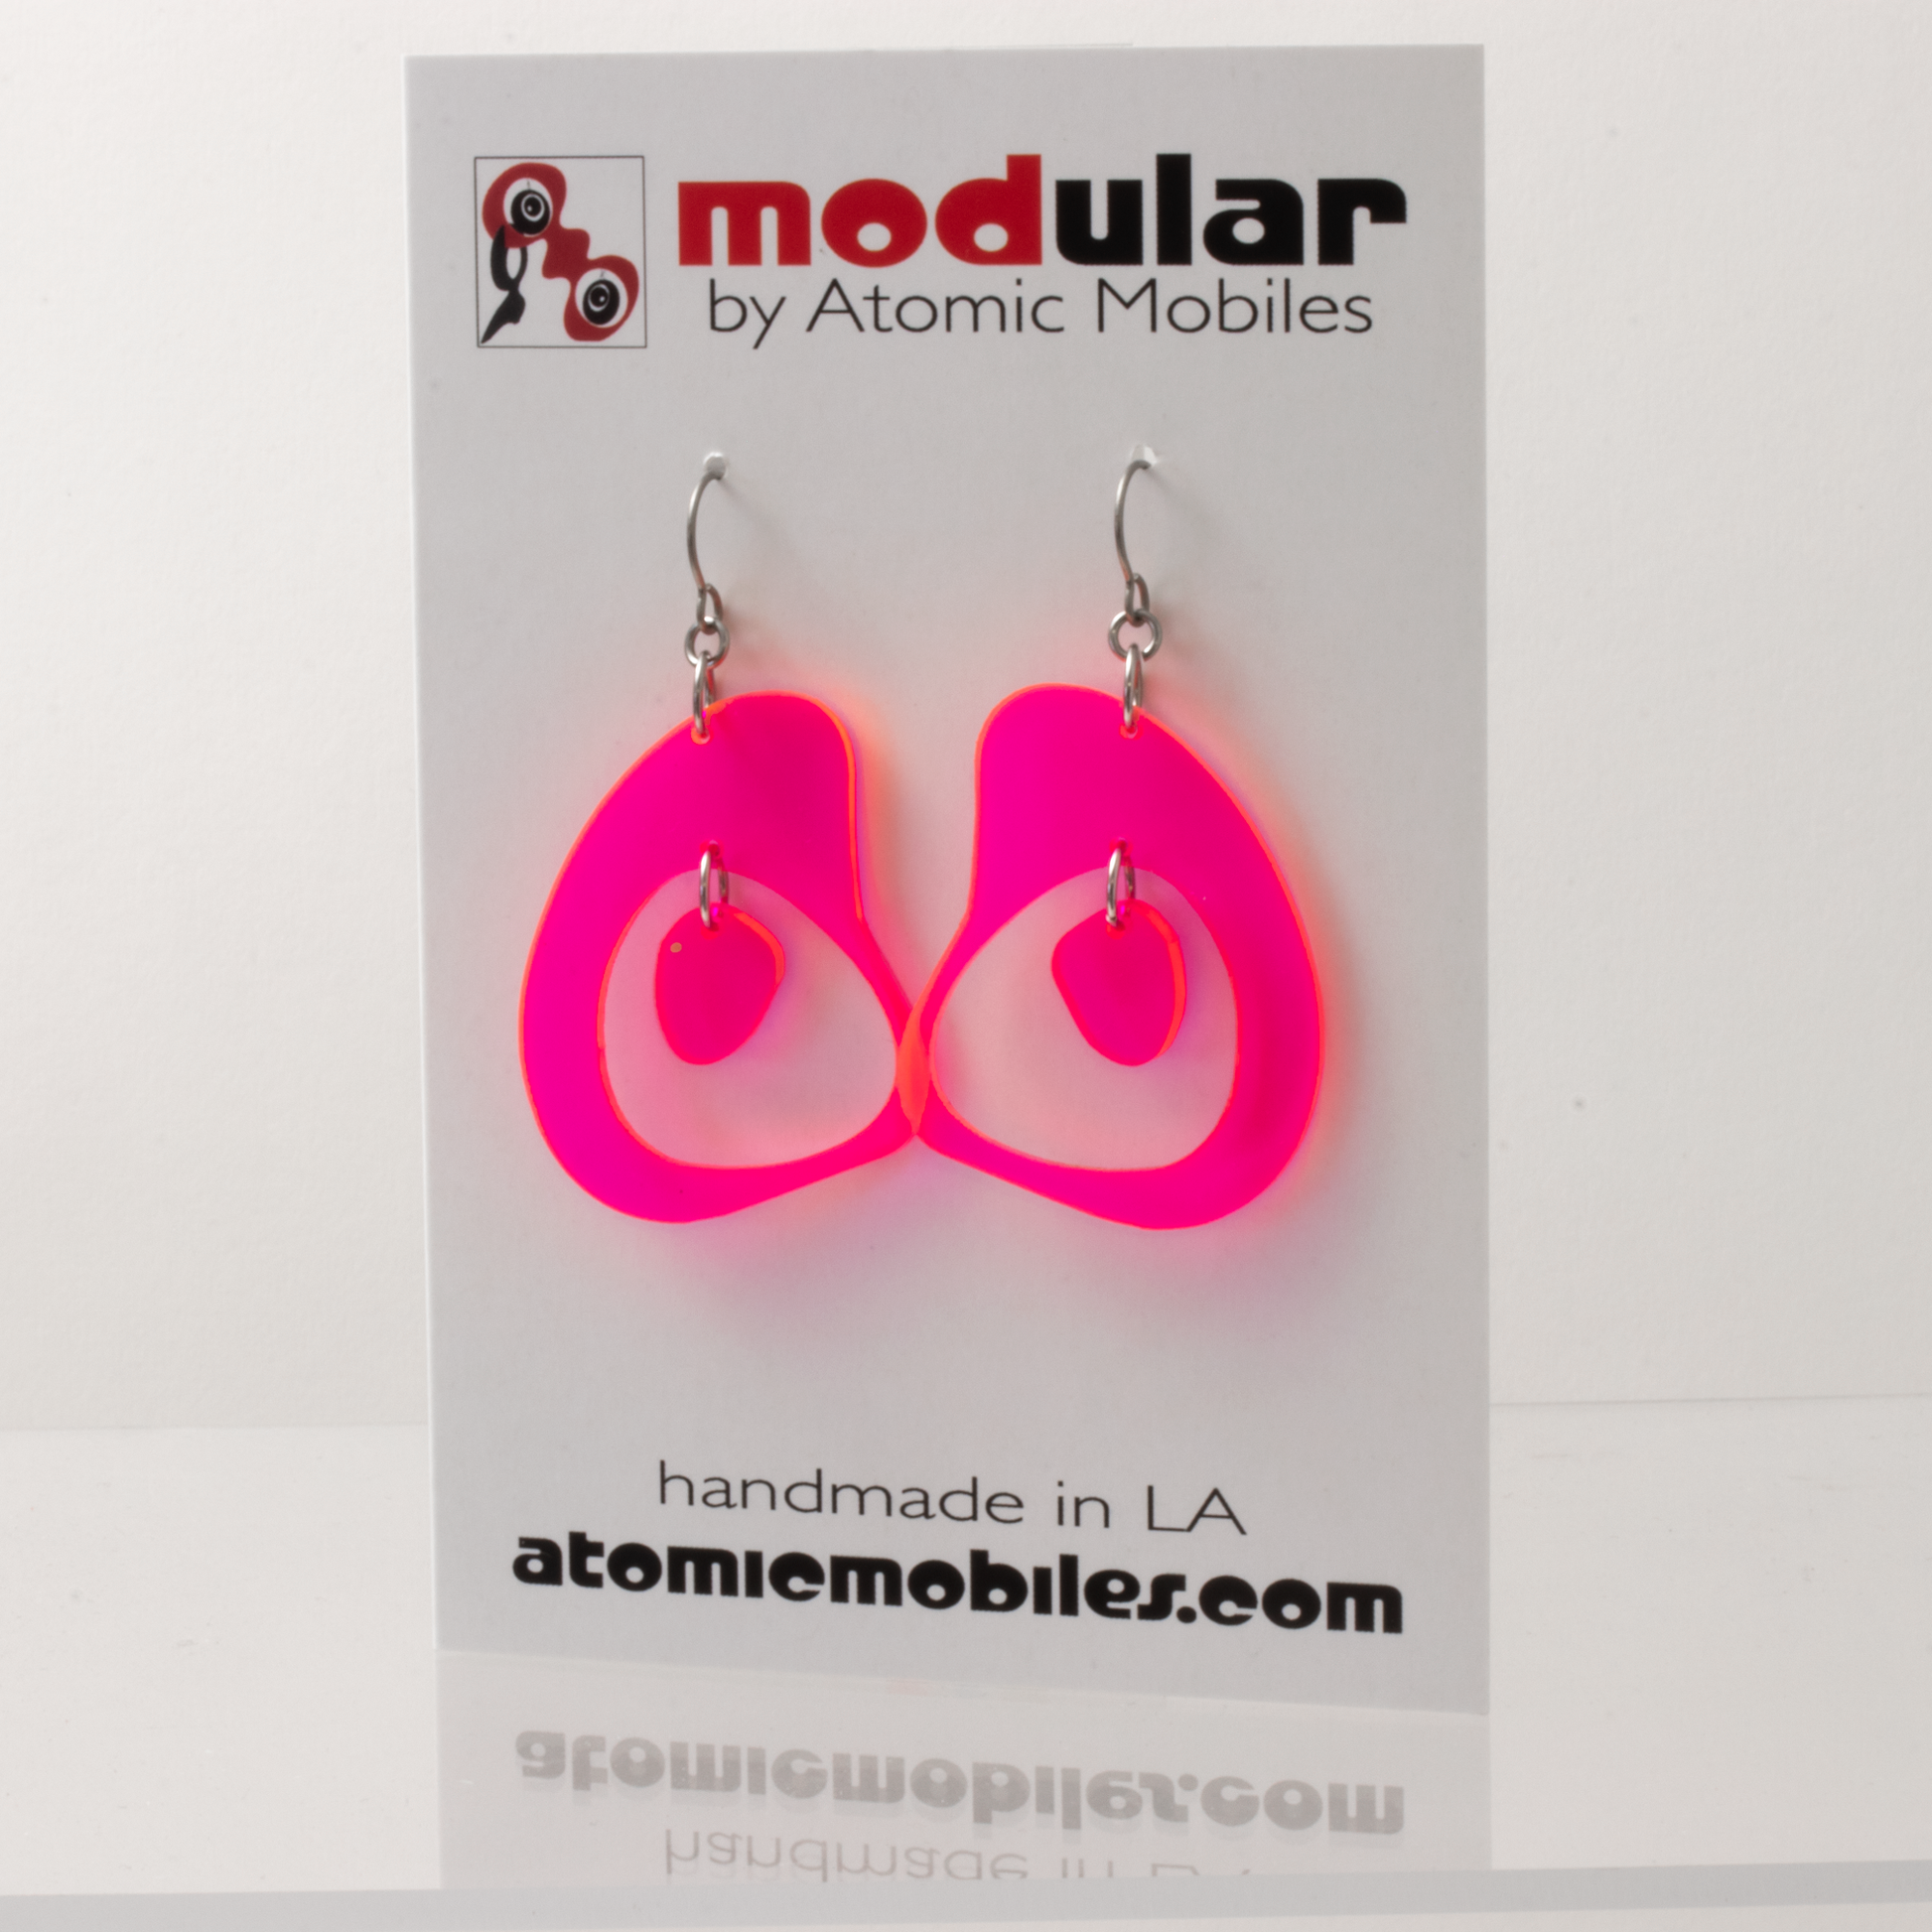 Boomerang 1970s Mid Century Modern Style Earrings in Neon Fluorescent Hot Pink plexiglass acrylic by AtomicMobiles.com